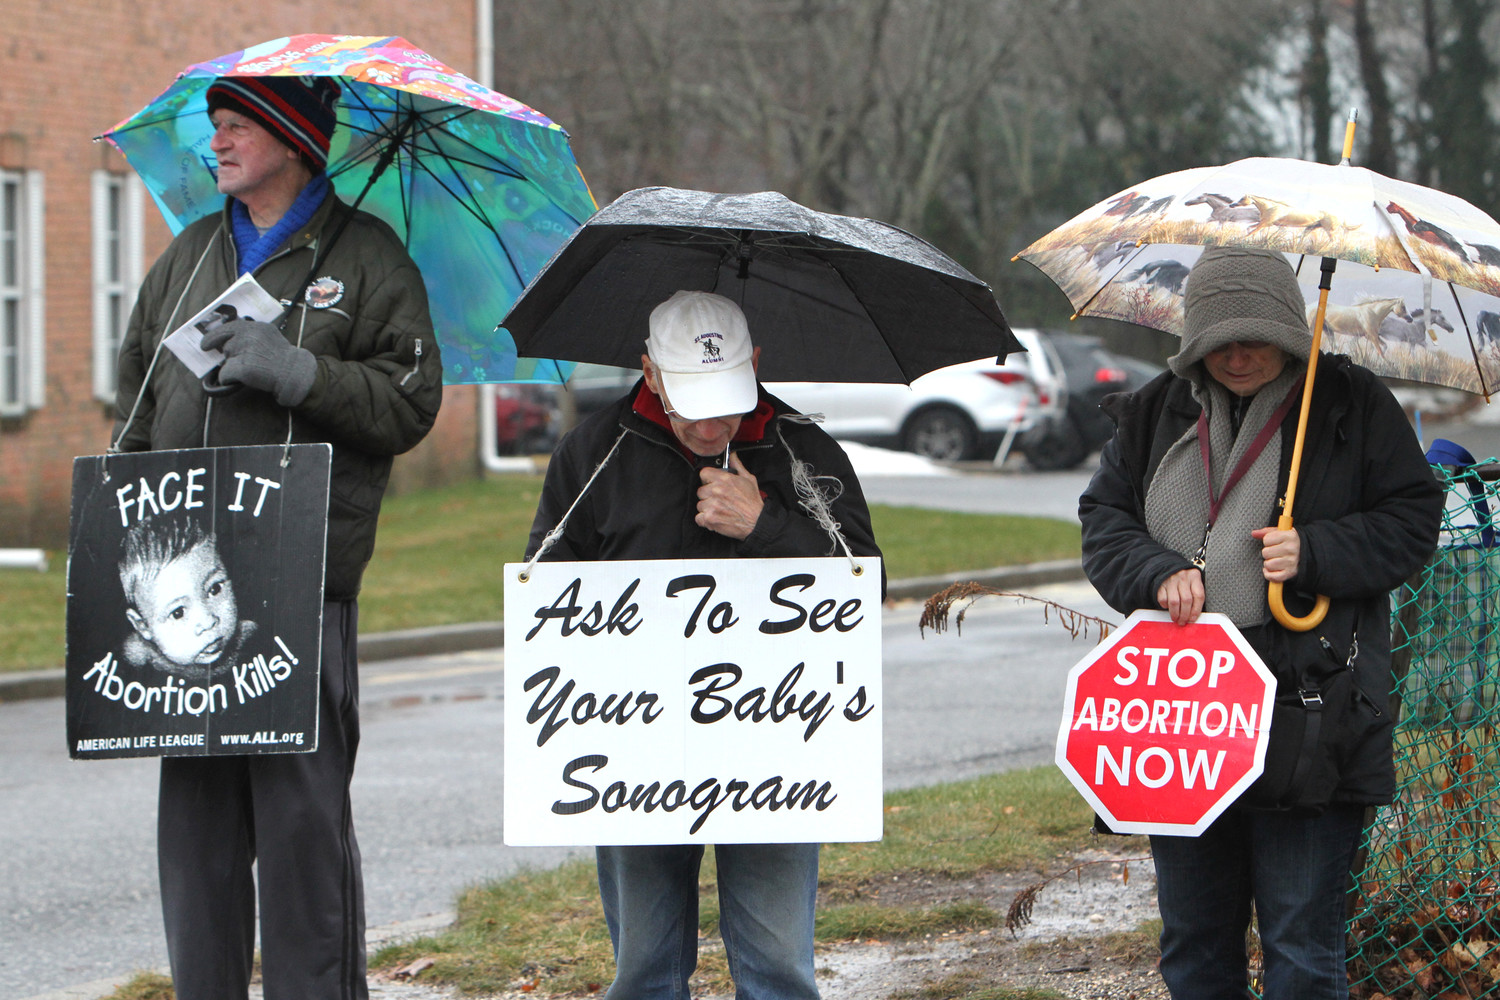 Pro-life advocates gather in silent witness near the entrance of a Planned Parenthood center in 2018 in Smithtown, N.Y. A proposed abortion law for New York state that would allow more health practitioners to provide abortion and remove all state restrictions on late-term abortions “is not progress” as lawmakers argue, said New York’s Catholic bishops.